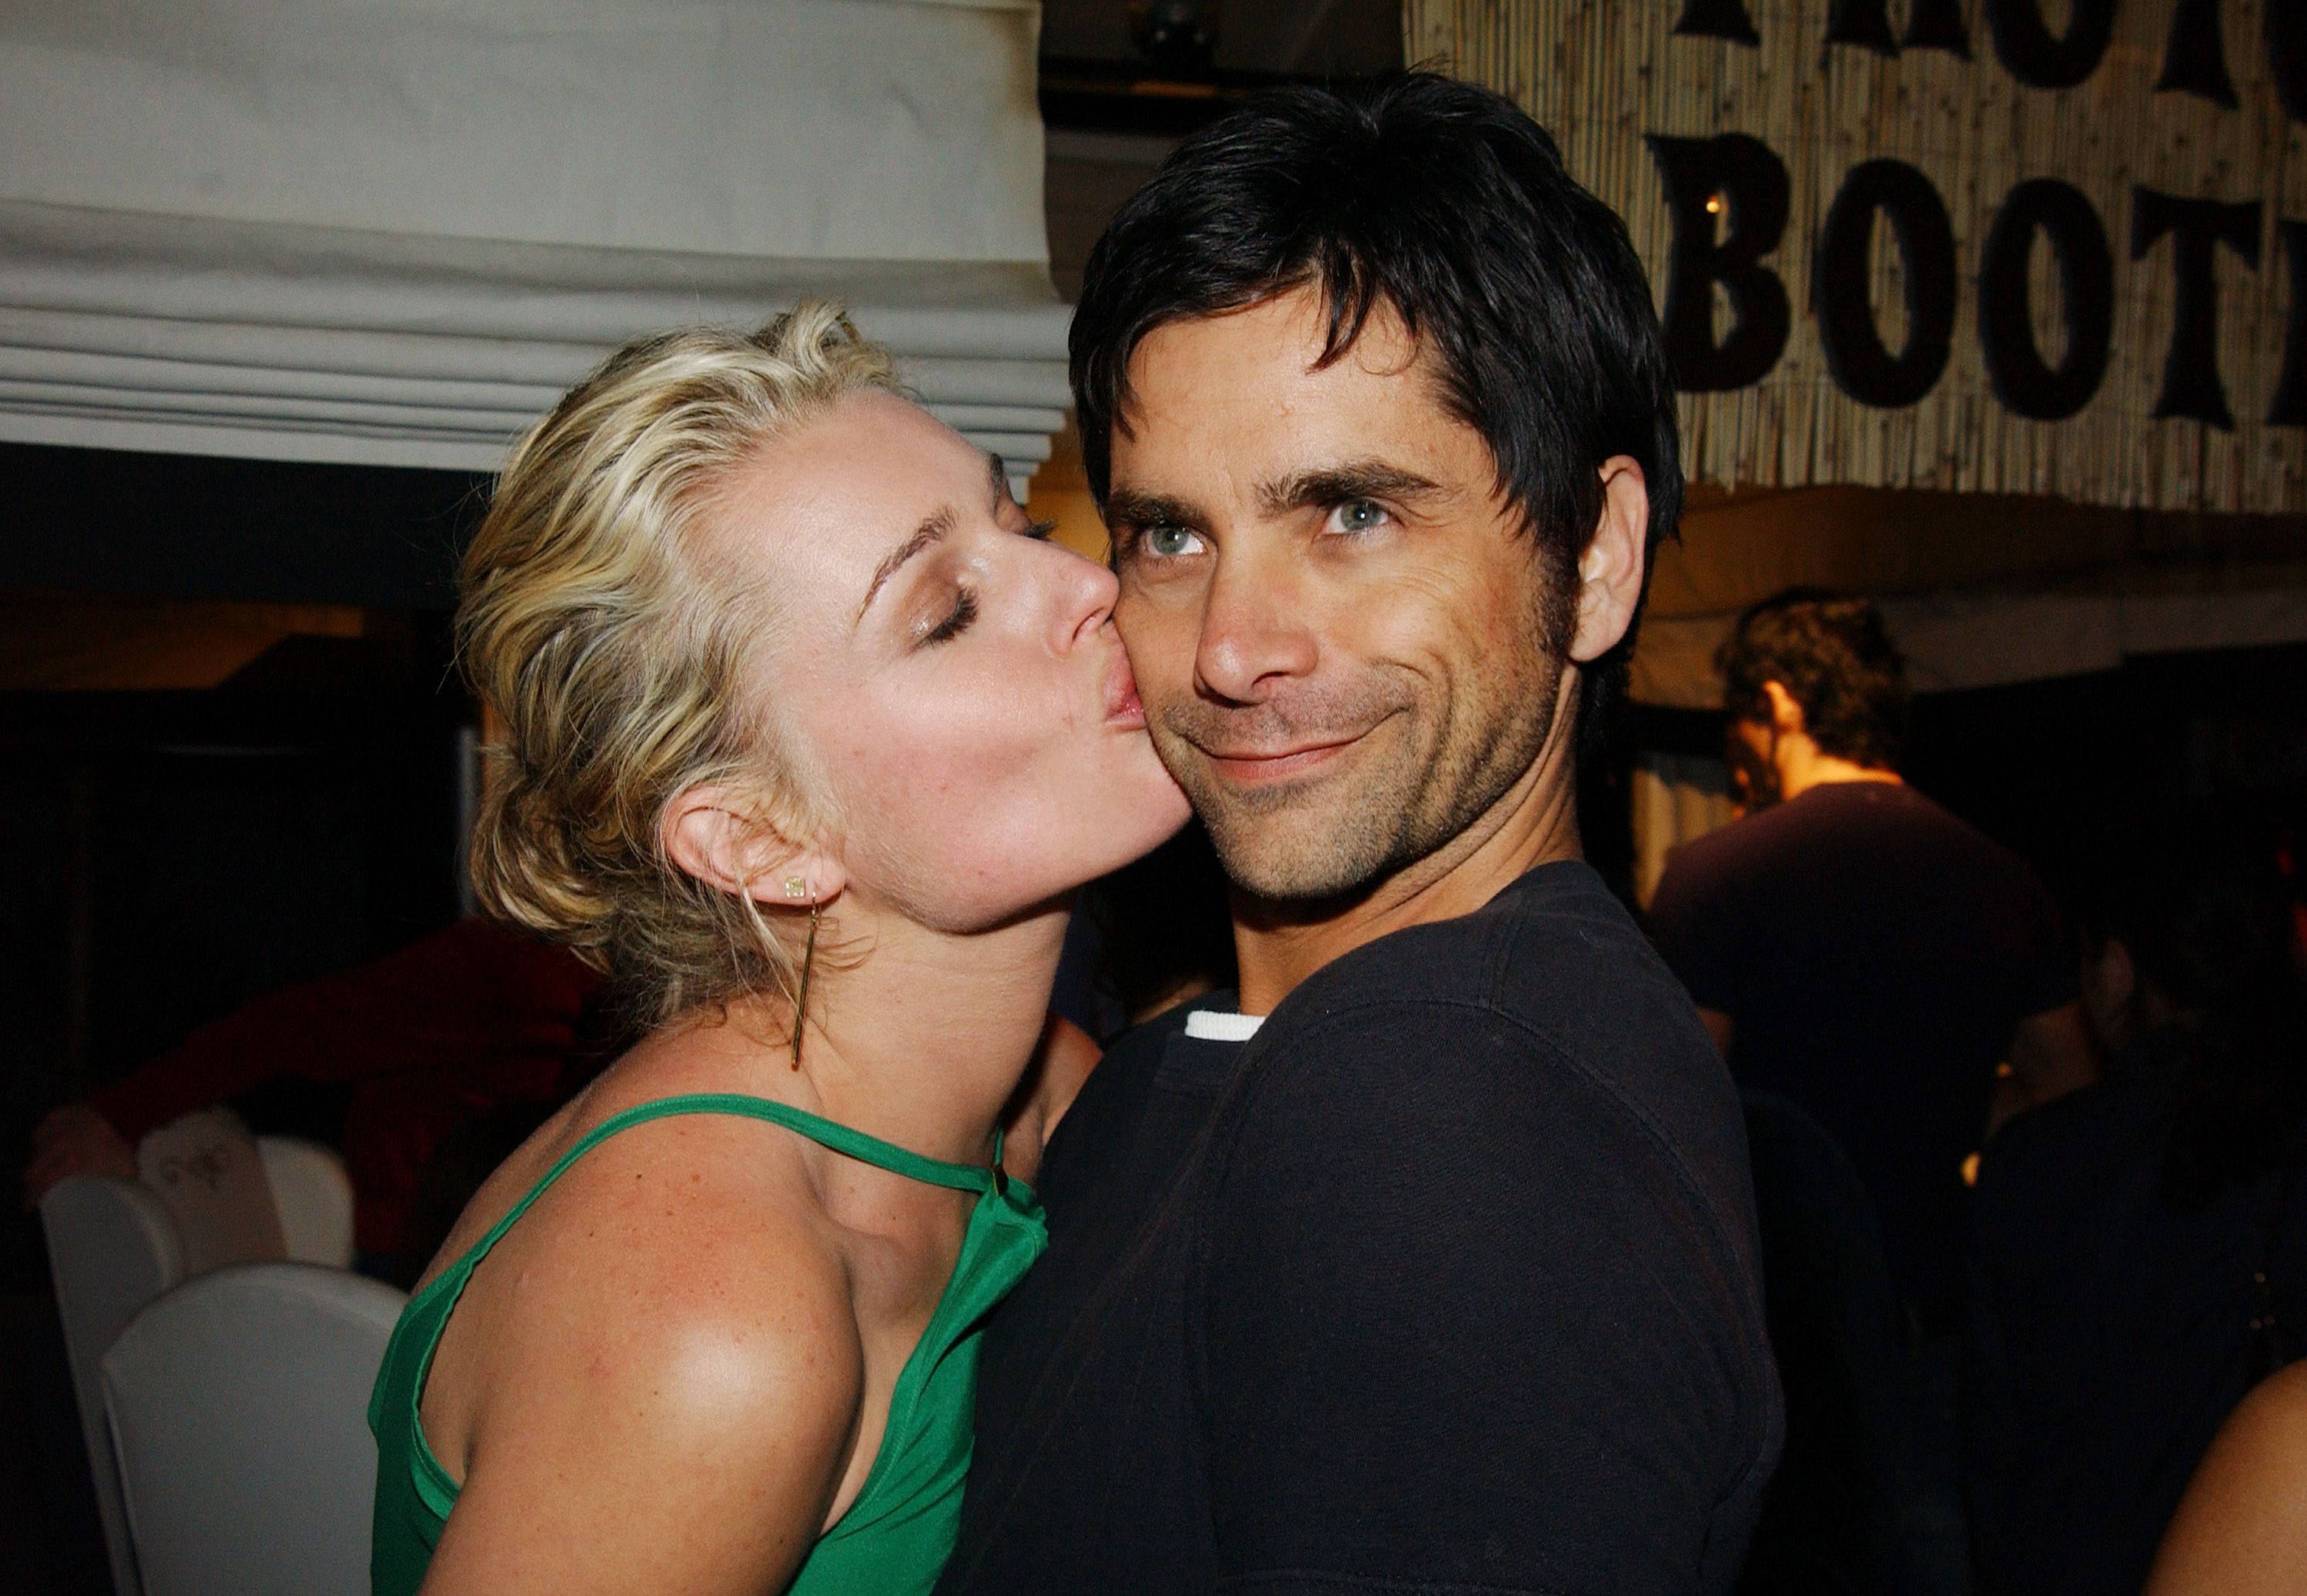 Rebecca Romijn and John Stamos at the PlayStation 2 "Bungalow Beach Party" in 2003 in Santa Monica, California | Photo: Getty Images